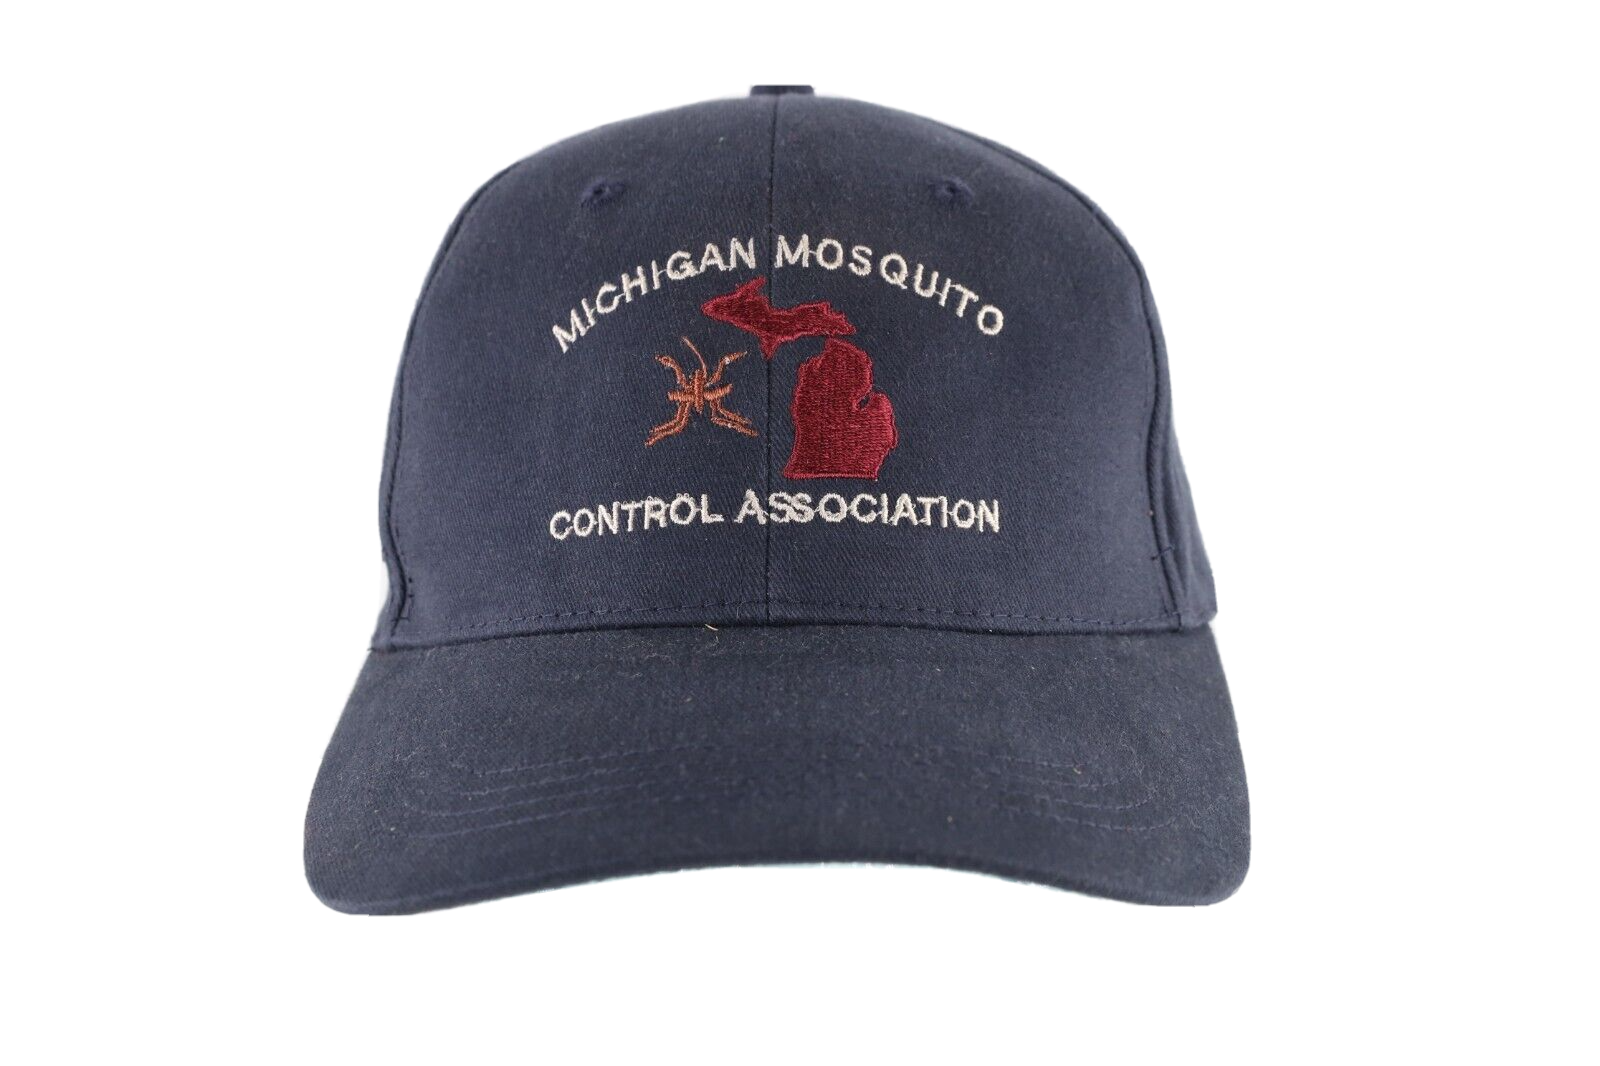 Primary image for Vintage 90s Faded Michigan Mosquito Control Association Spell Out Dad Hat Cap